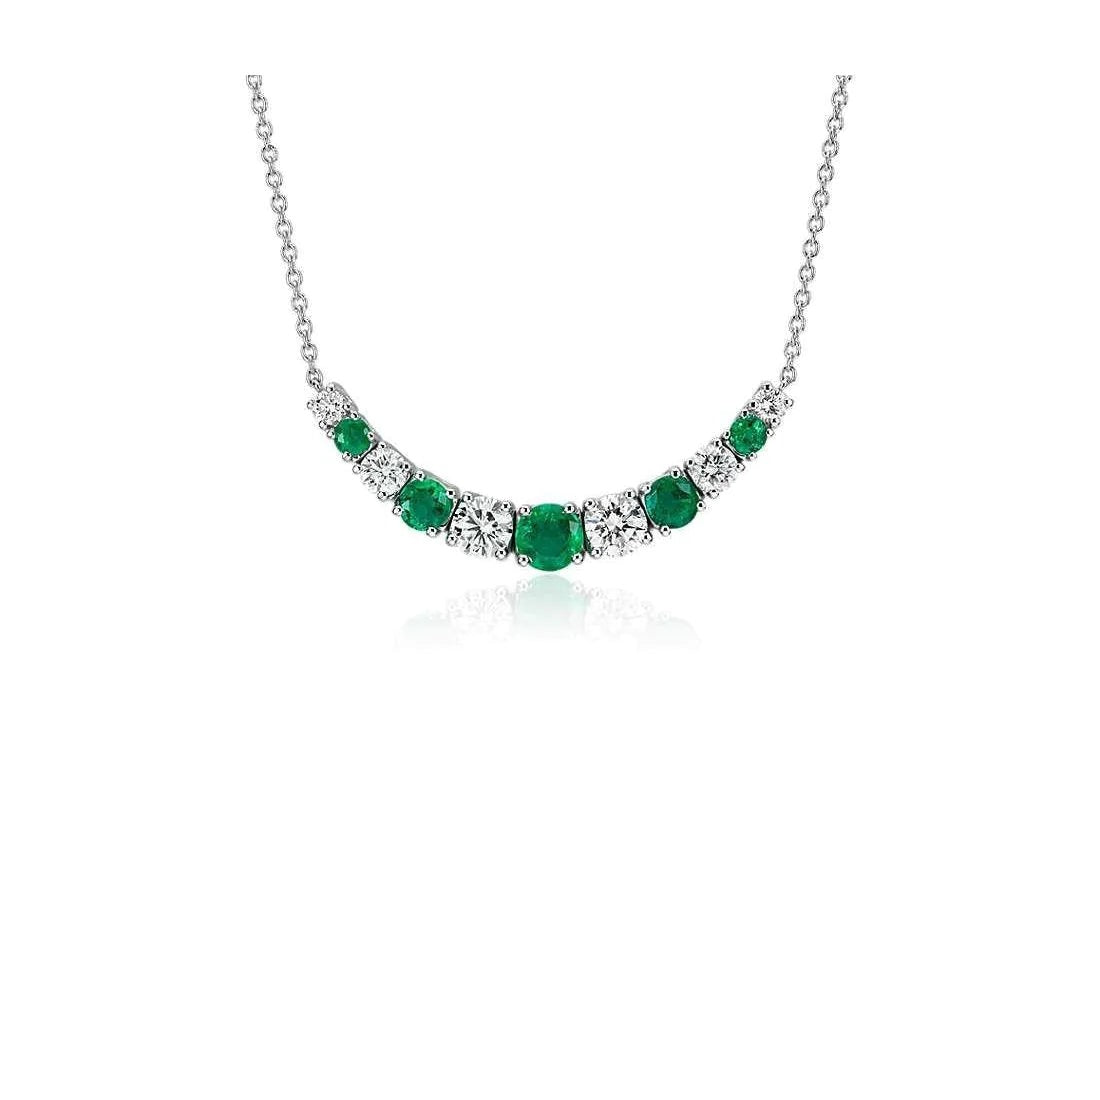 26 Carats Round Cut Green Emerald With Diamond Necklace White Gold 14K